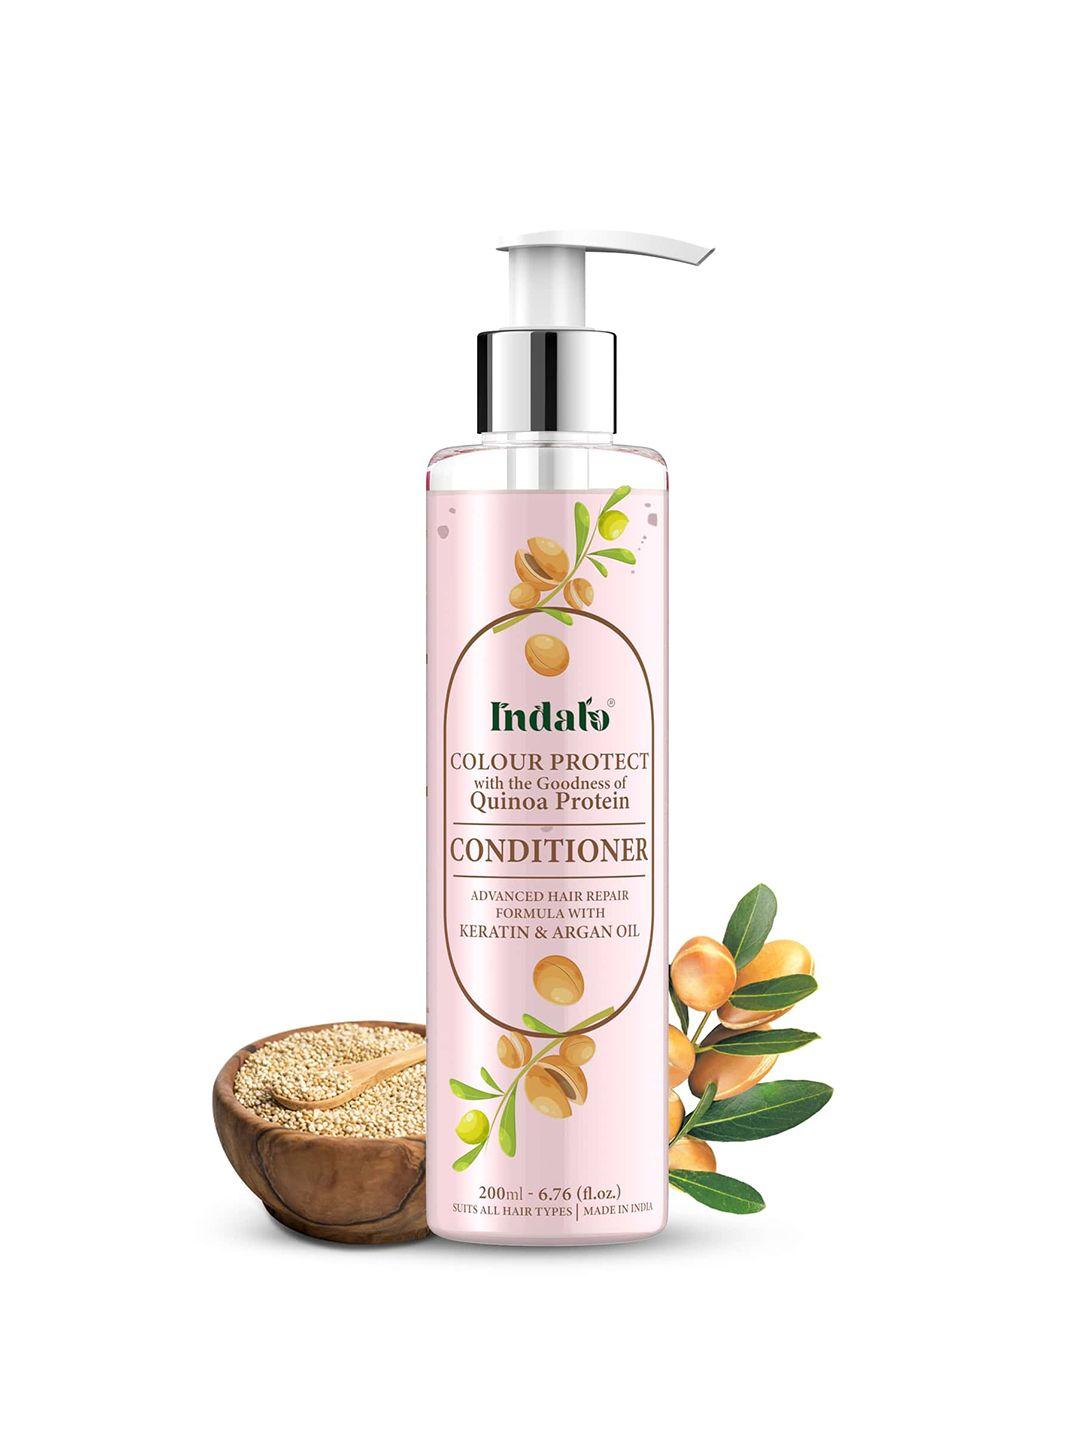 indalo quinoa protein colour protect conditioner for hair & damaged hair repair - 200 ml